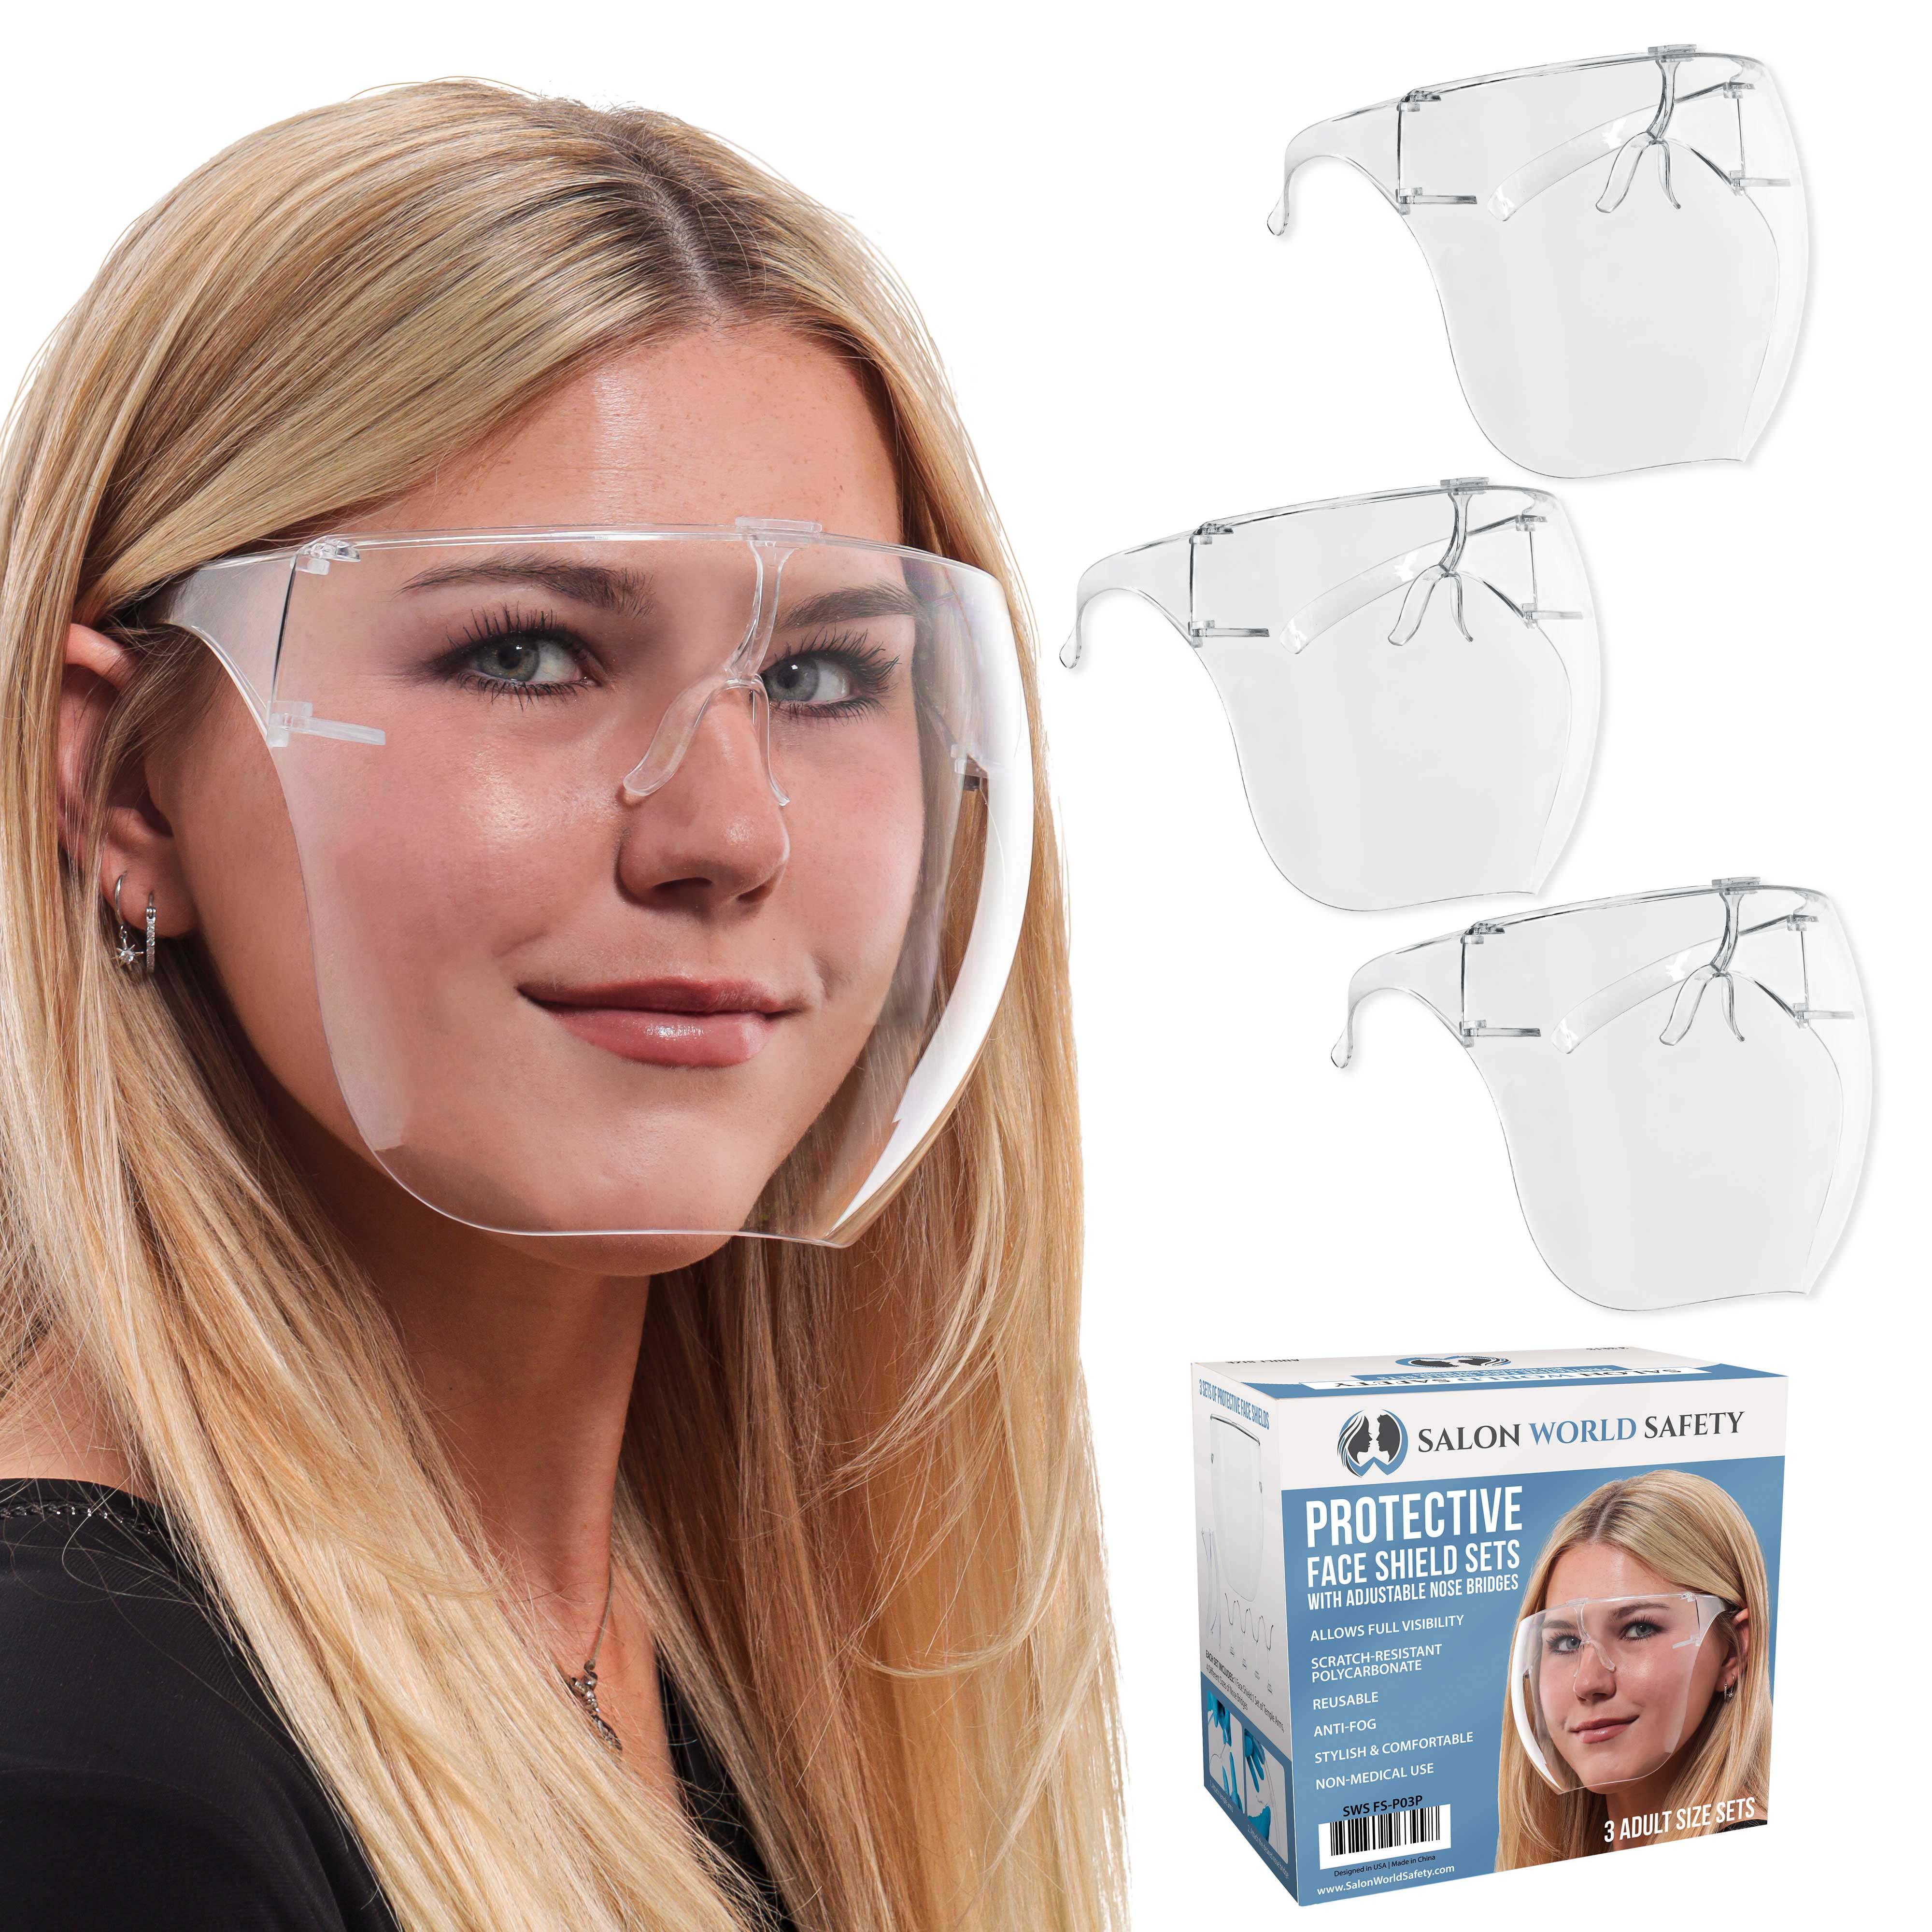 pack of 50 TCP Global Salon World Safety Face Shields With Glasses Frames for sale online 